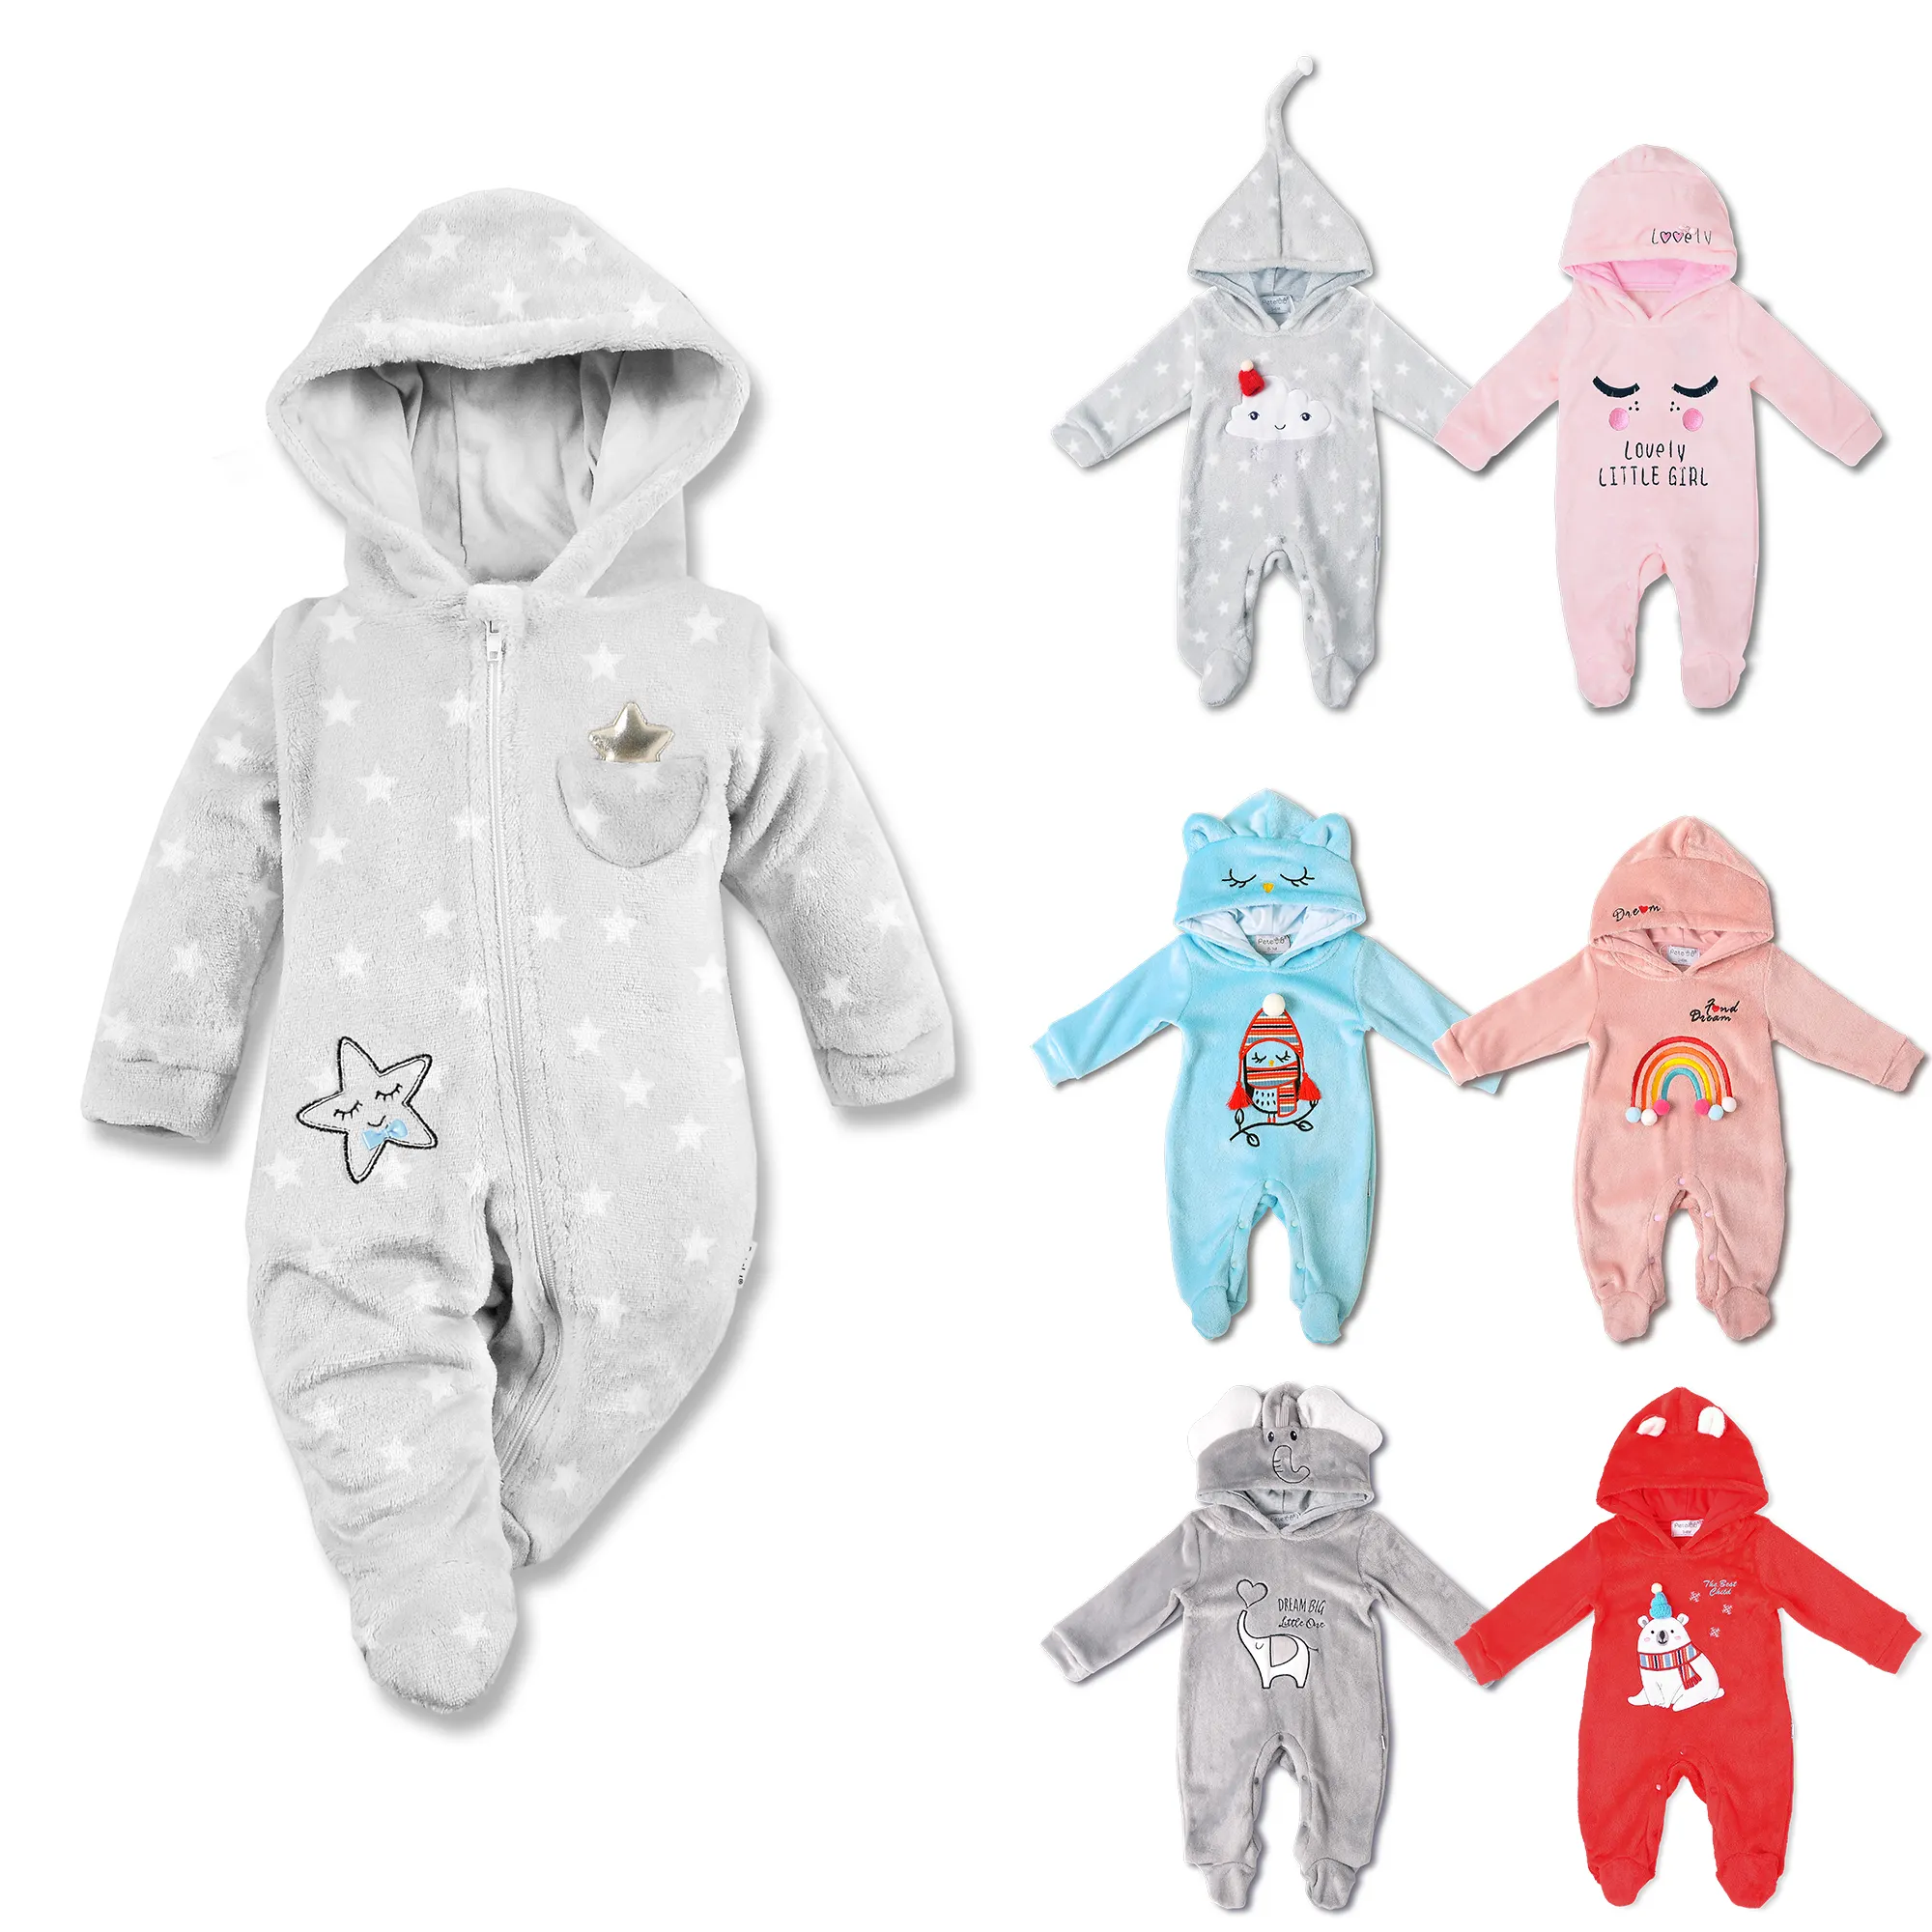 baby clothes in baby rompers unisex hoodies manufacturer costume baby clothes guangzhou petulu